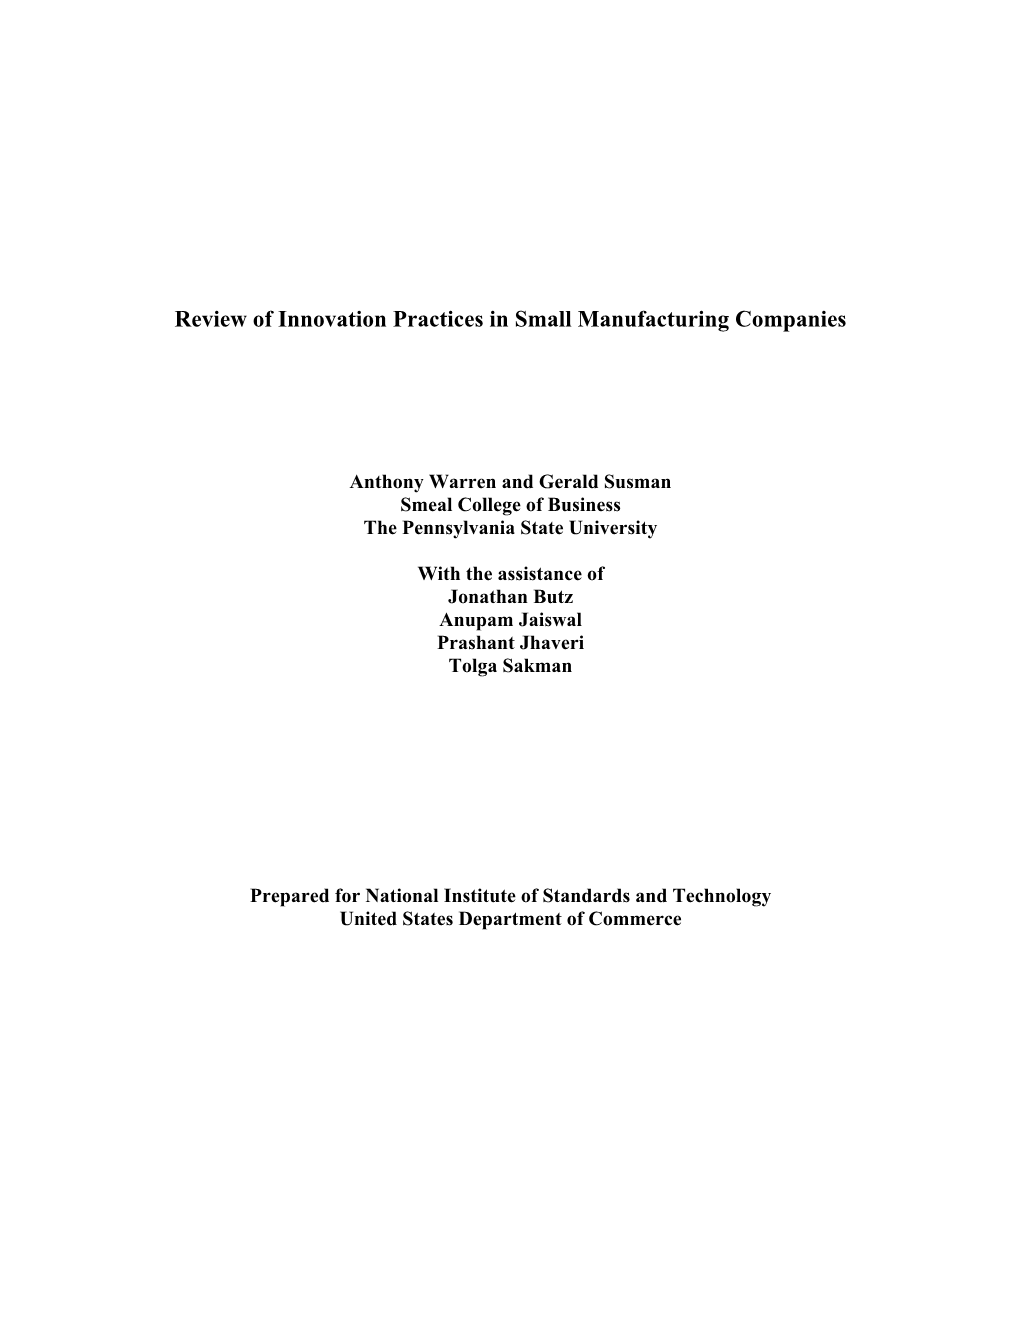 Review of Innovation Practices in Small Manufacturing Companies